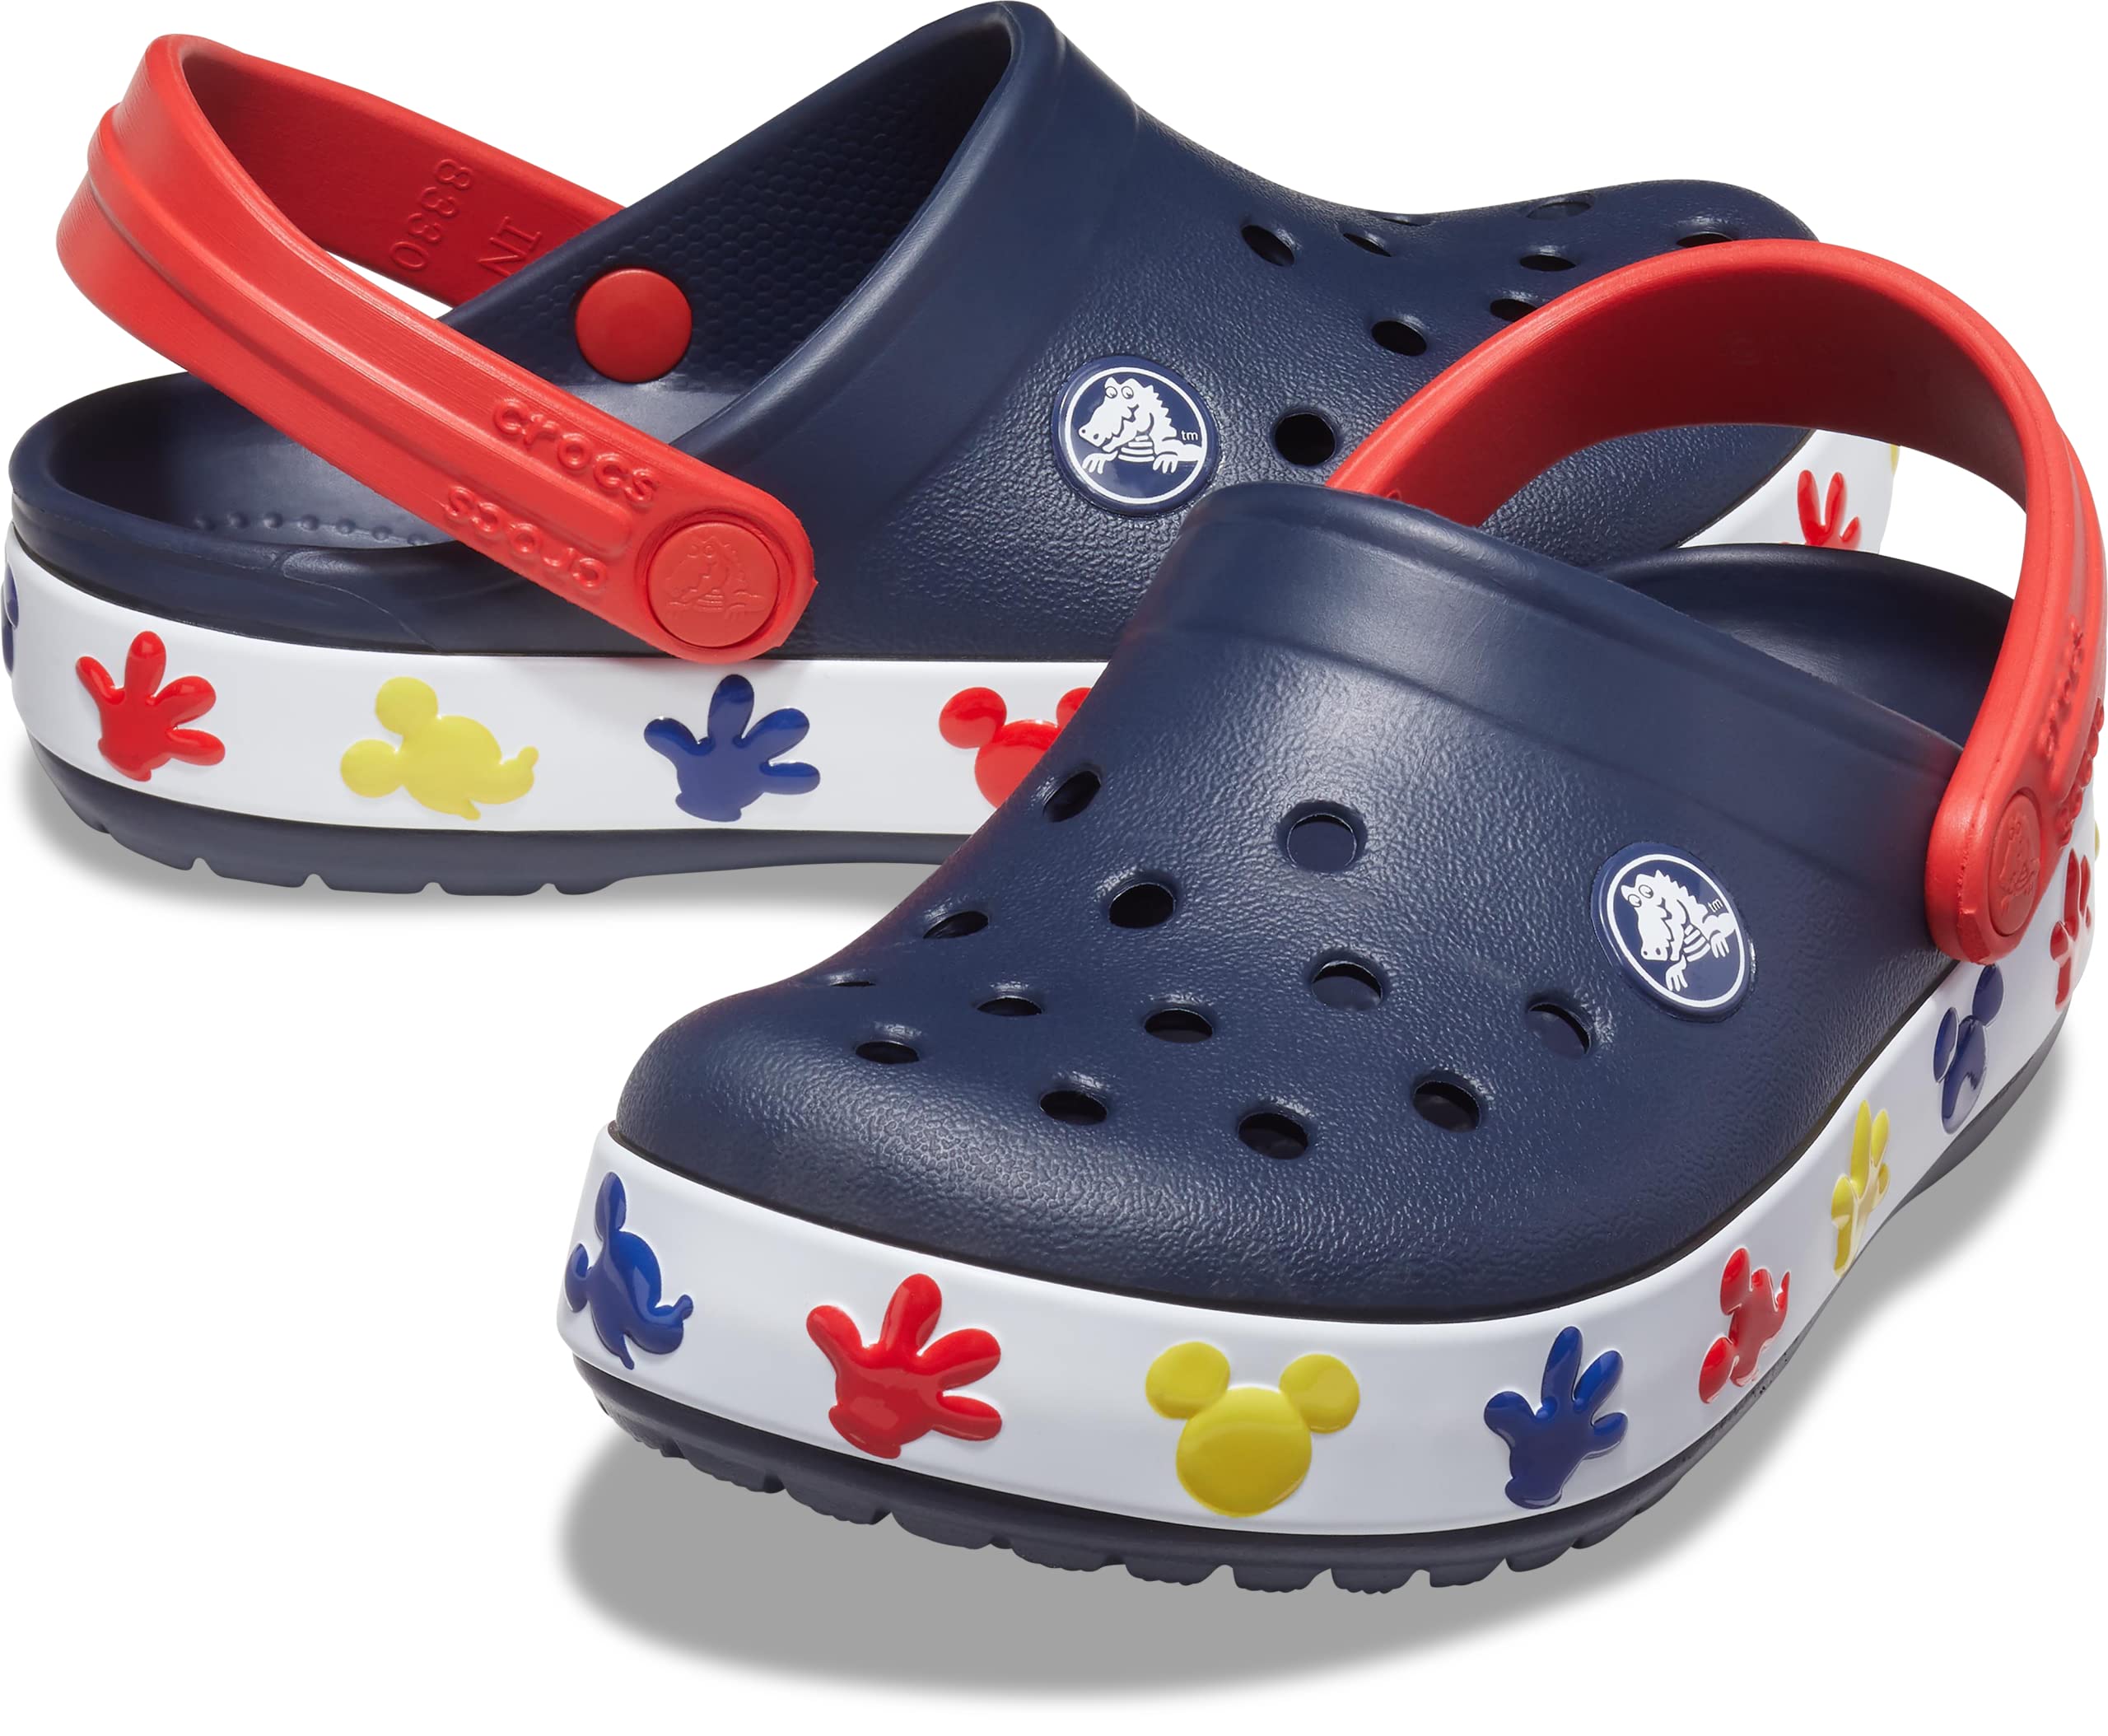 Crocs boys unisex-child Disney Mickey and Minnie Mouse Clogs, Light Up Shoes